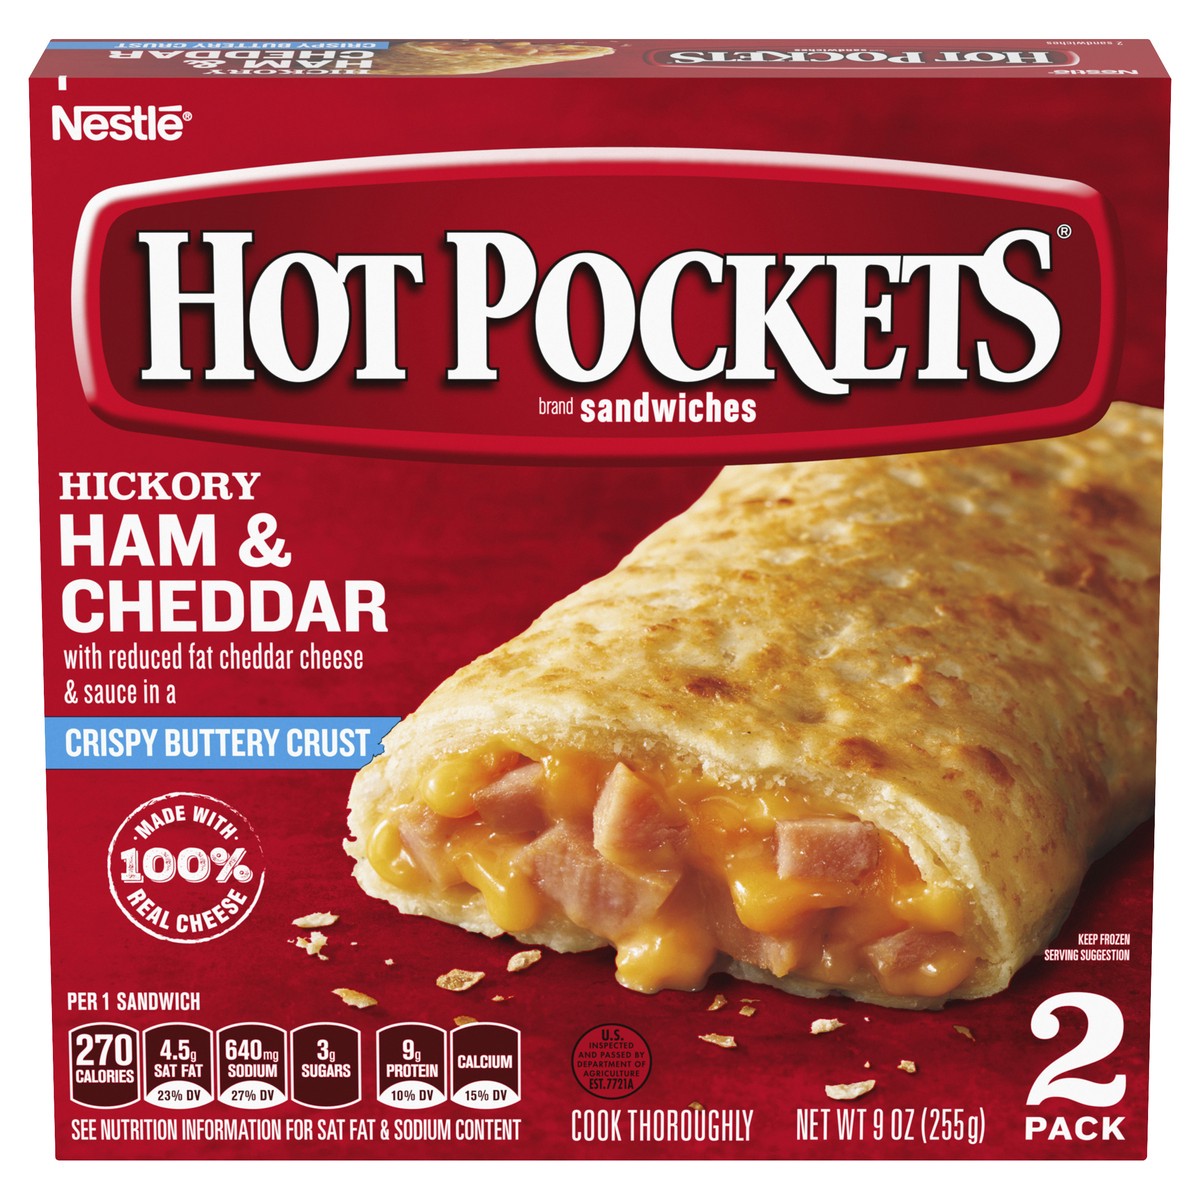 slide 1 of 8, Hot Pockets Hickory Ham & Cheddar Frozen Snacks in a Crispy Buttery Crust, Frozen Ham and Cheese Sandwiches Made with Real Reduced Fat Cheddar Cheese, 2 Count Frozen Sandwiches, 2 ct; 4.5 oz